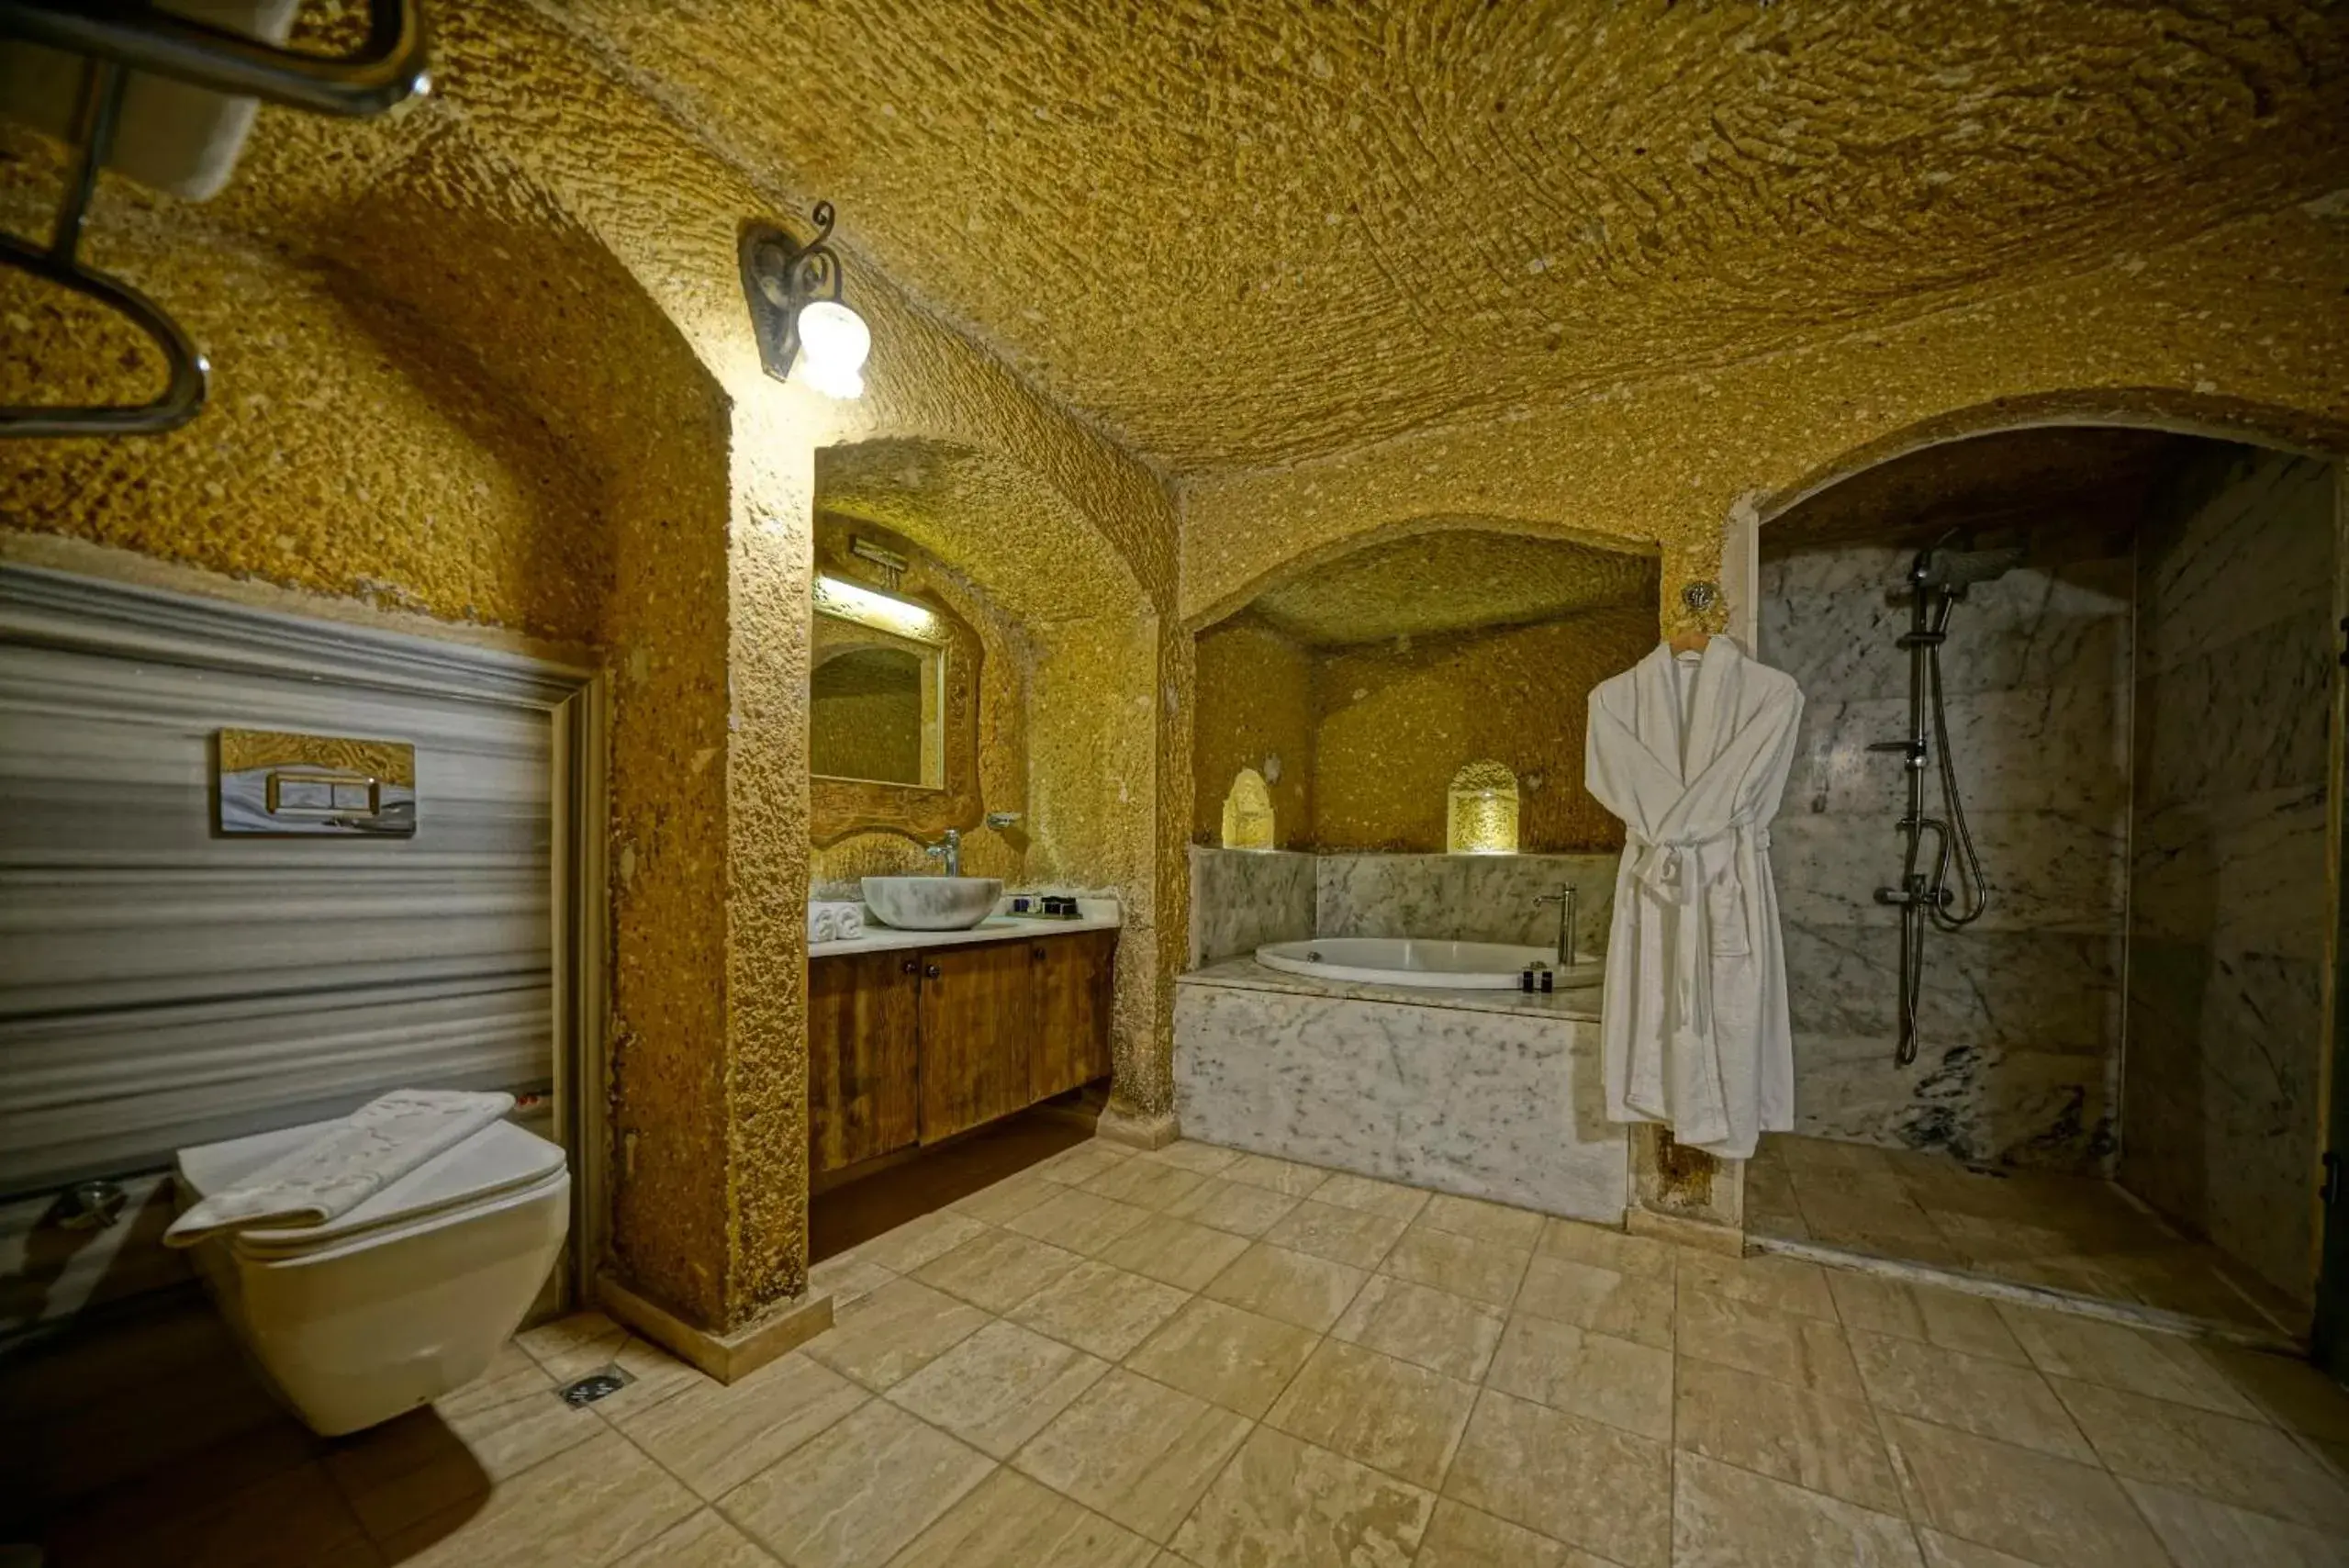 Shower in Holiday Cave Hotel